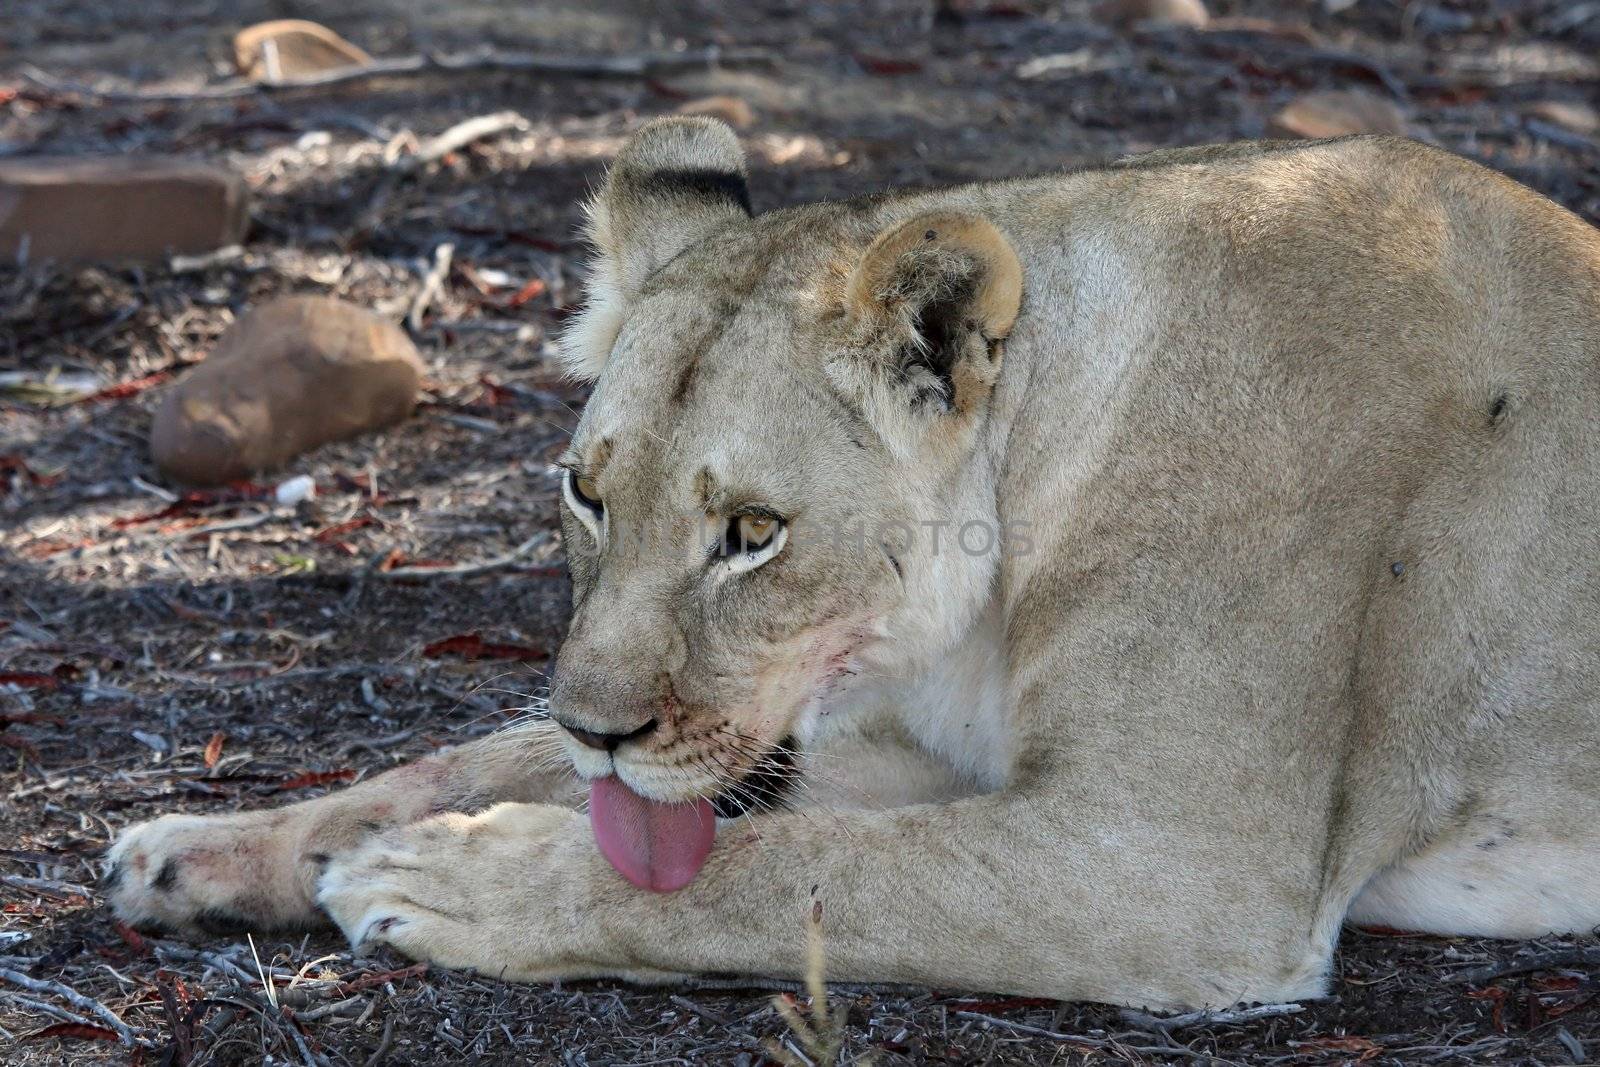 Lioness cleaning her fur with her rough pink tongue